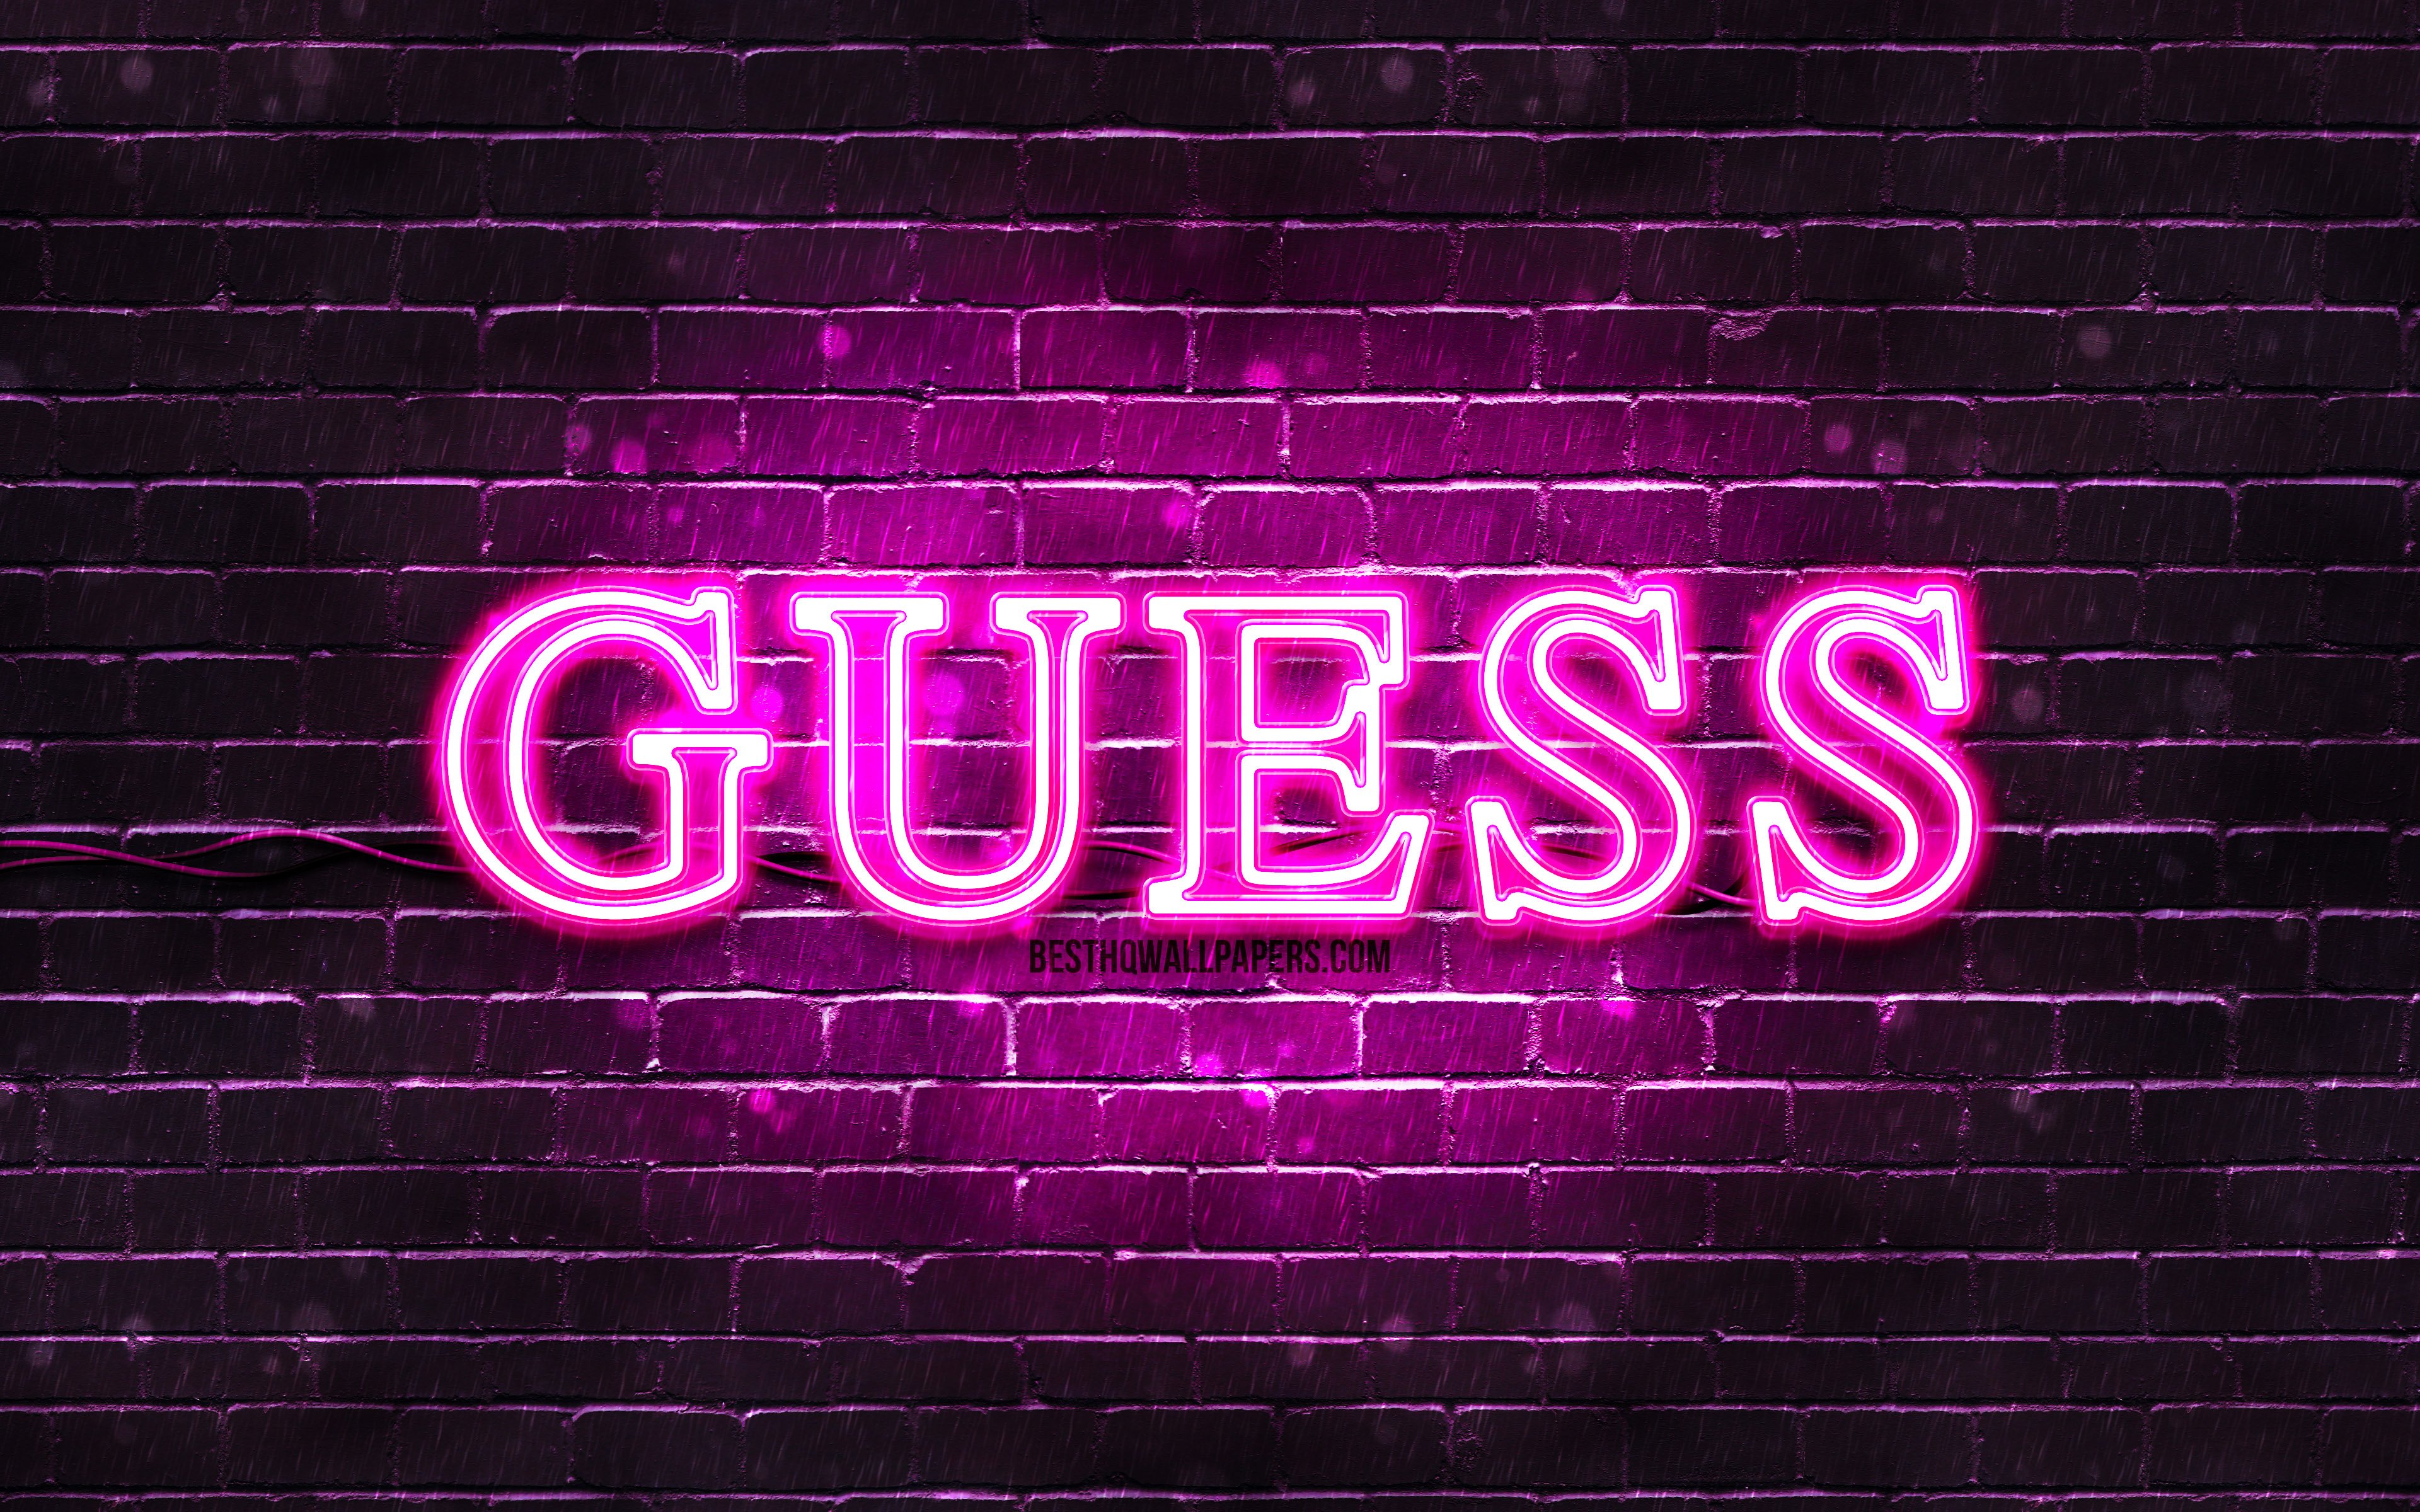 Download wallpapers Guess red logo 4k red brickwall Guess logo brands  Guess neon logo Guess for desktop free Pictures for desktop free